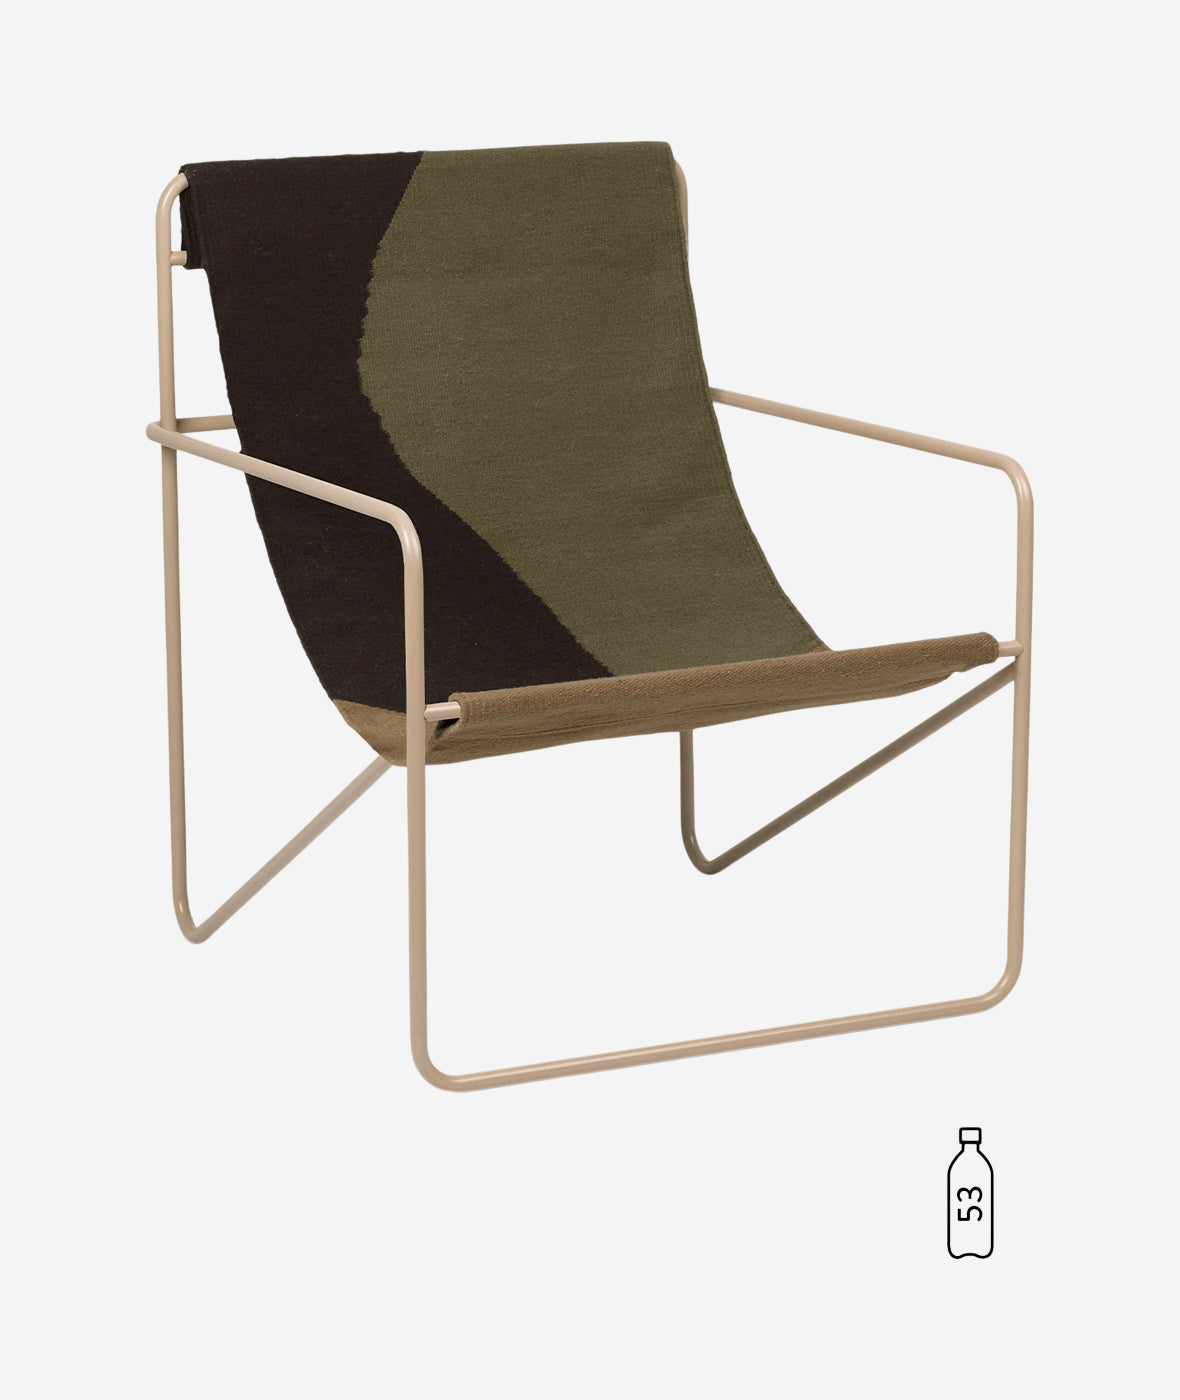 Desert Lounge Chair - More Options